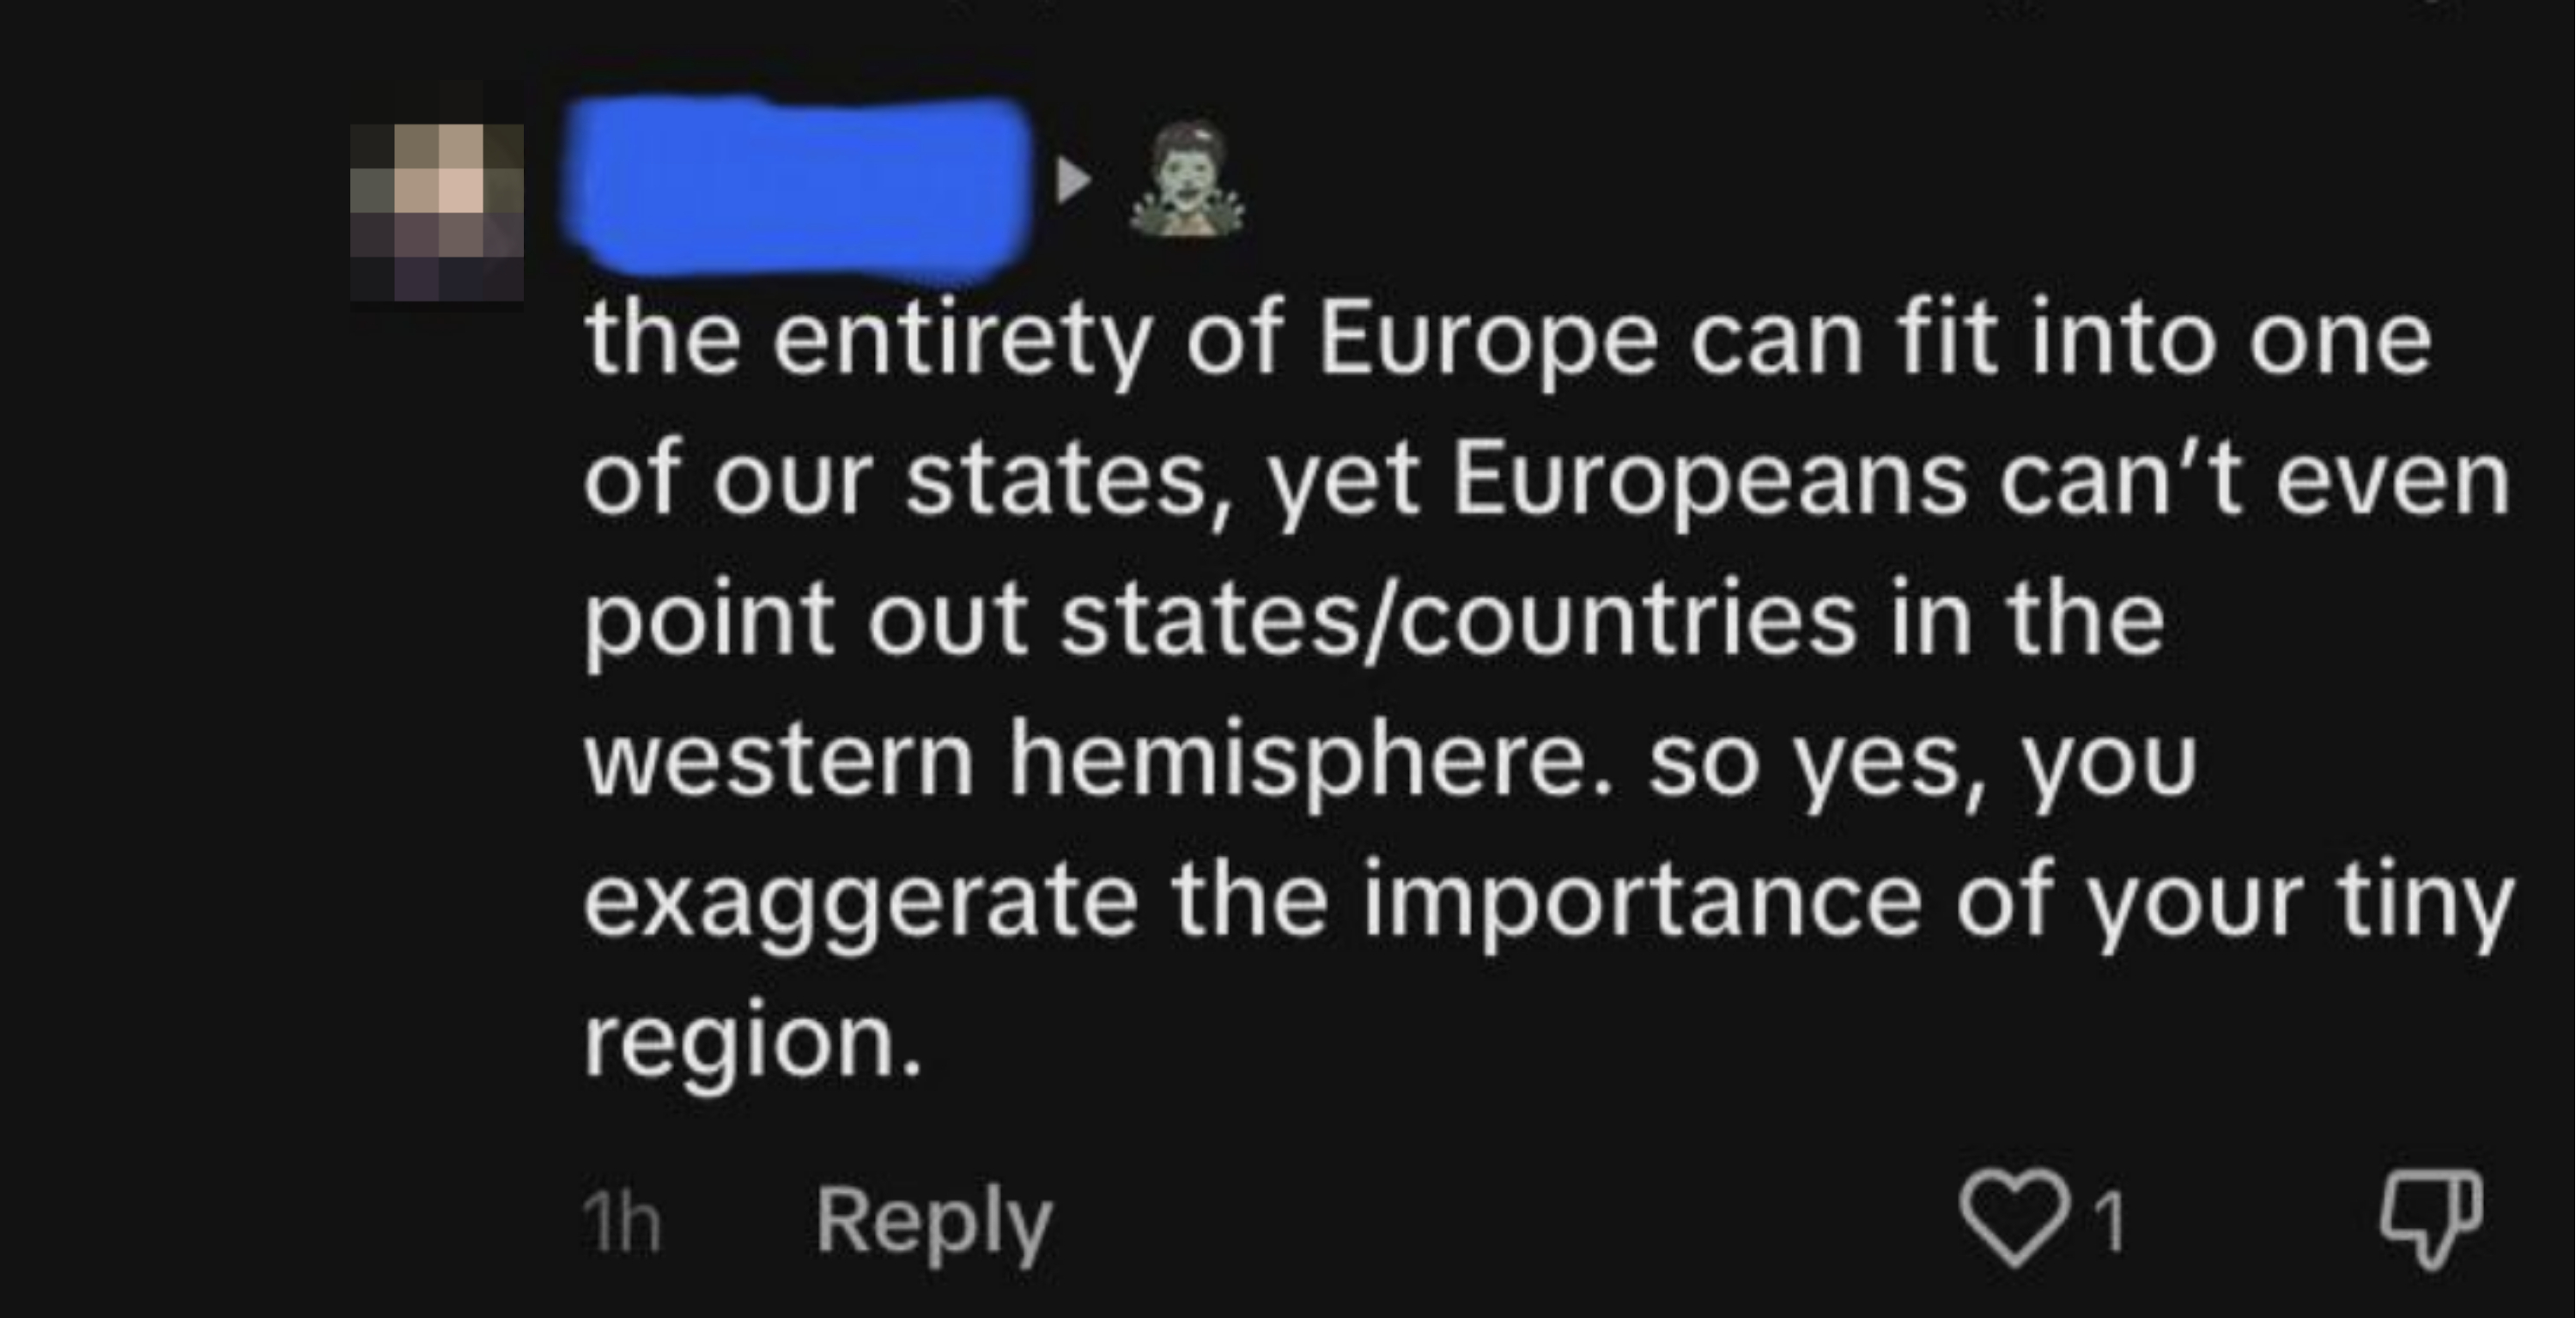 &quot;the entirety of europe can fit into one of our states, yet europeans can&#x27;t even point out states/countries in the western hemisphere. so yes, you exaggerate the importance of your tiny region&quot;